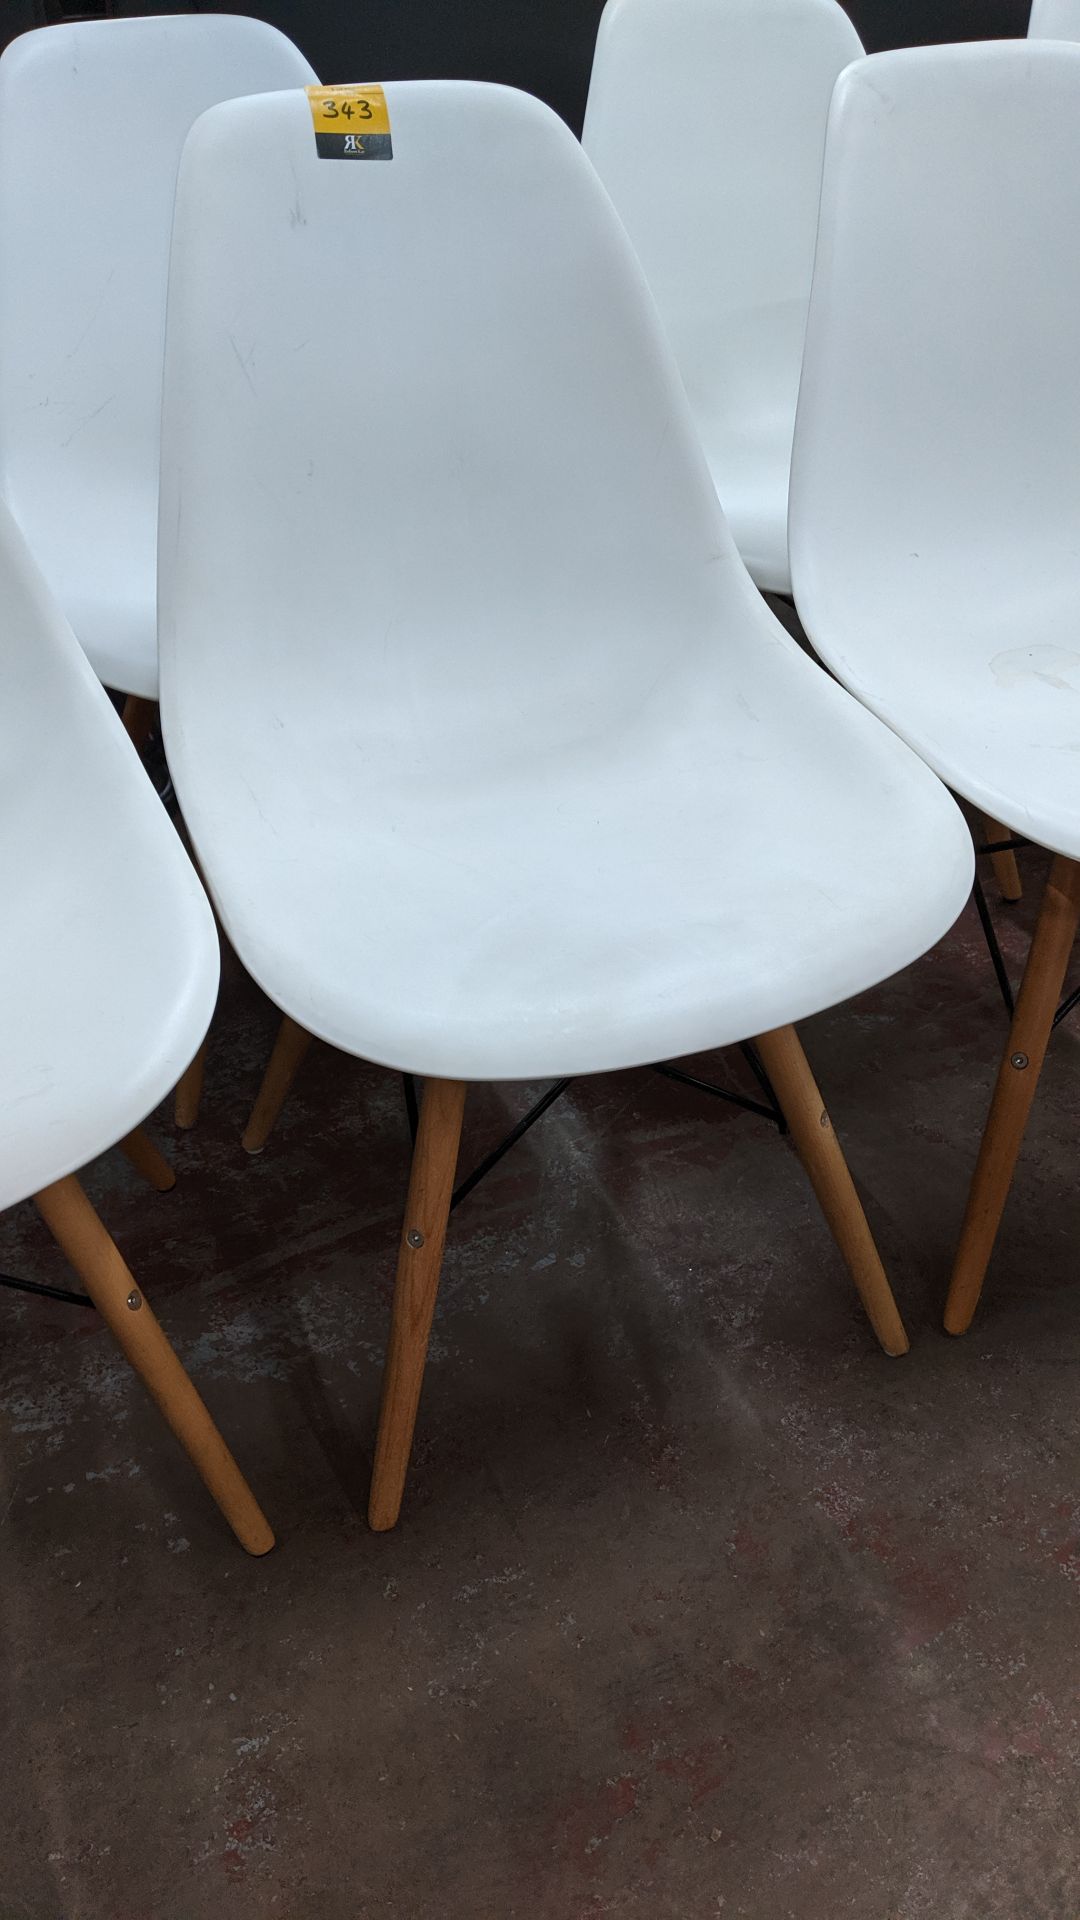 6 off white chairs with wooden legs NB. Lots 342 - 344 consist of different quantities of the same - Image 4 of 5